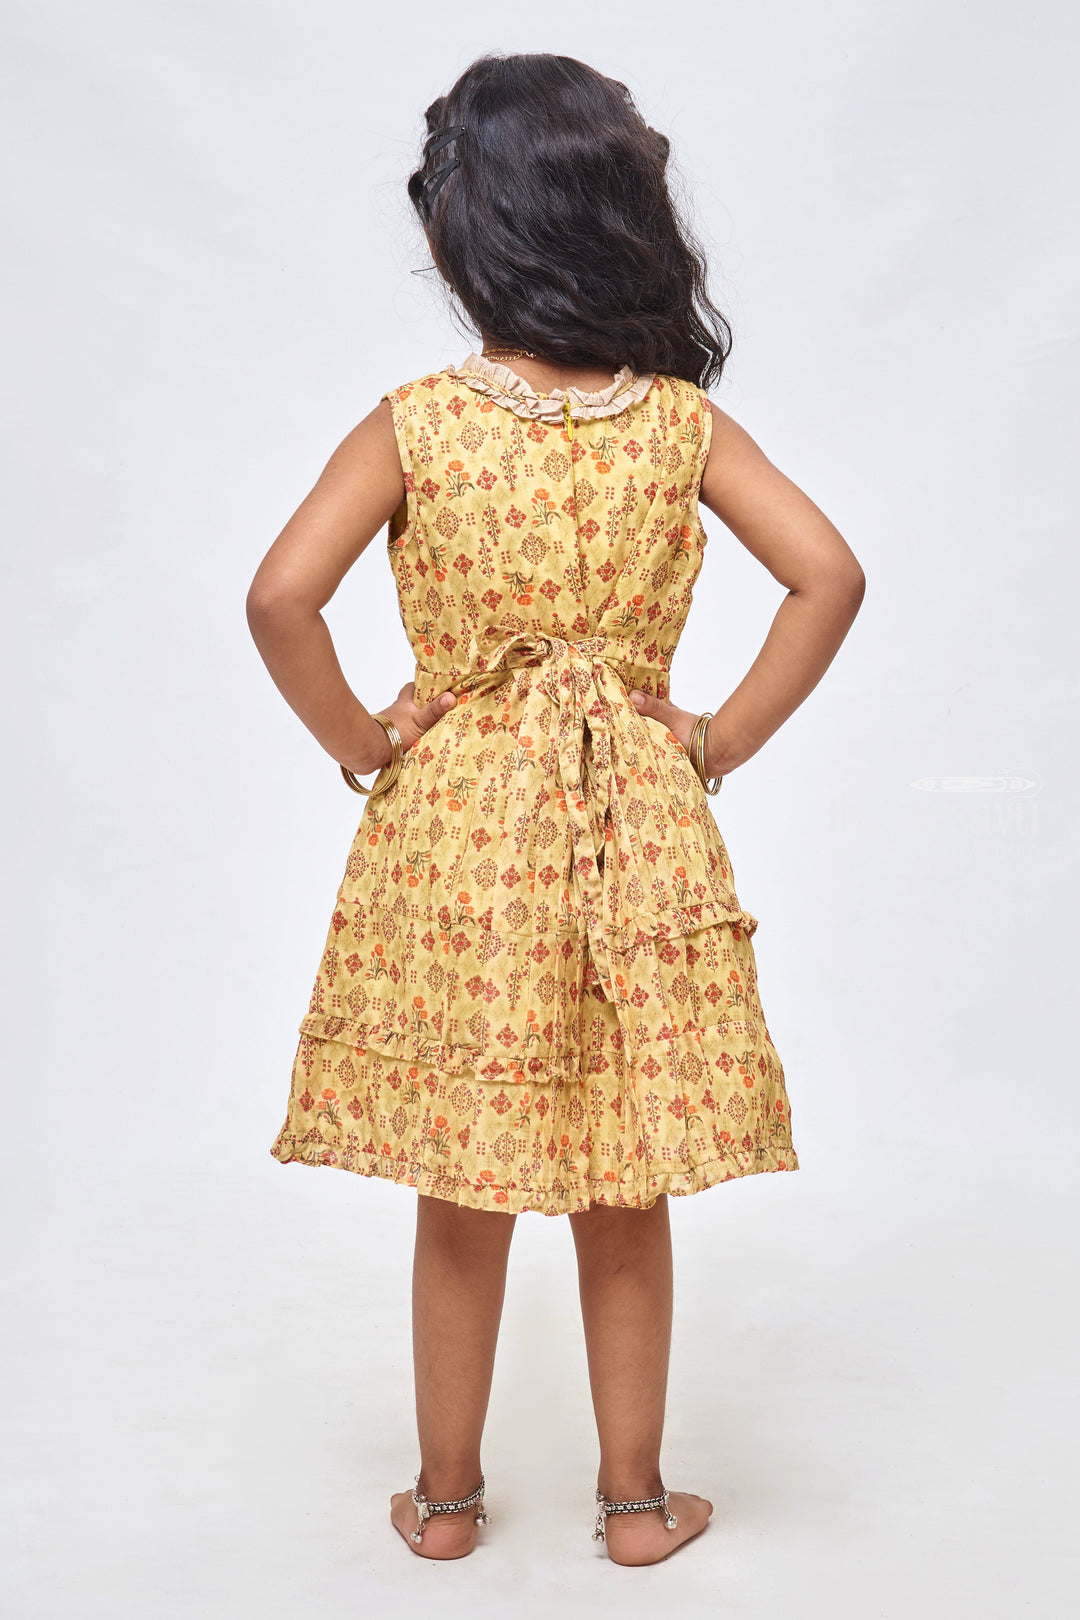 The Nesavu Girls Cotton Frock Sunny Vibes: Floral Printed Pleated Yellow Cotton Frock for Girls Nesavu Shop Elegant Cotton Frocks: Stylish & Casual Dresses for Kids